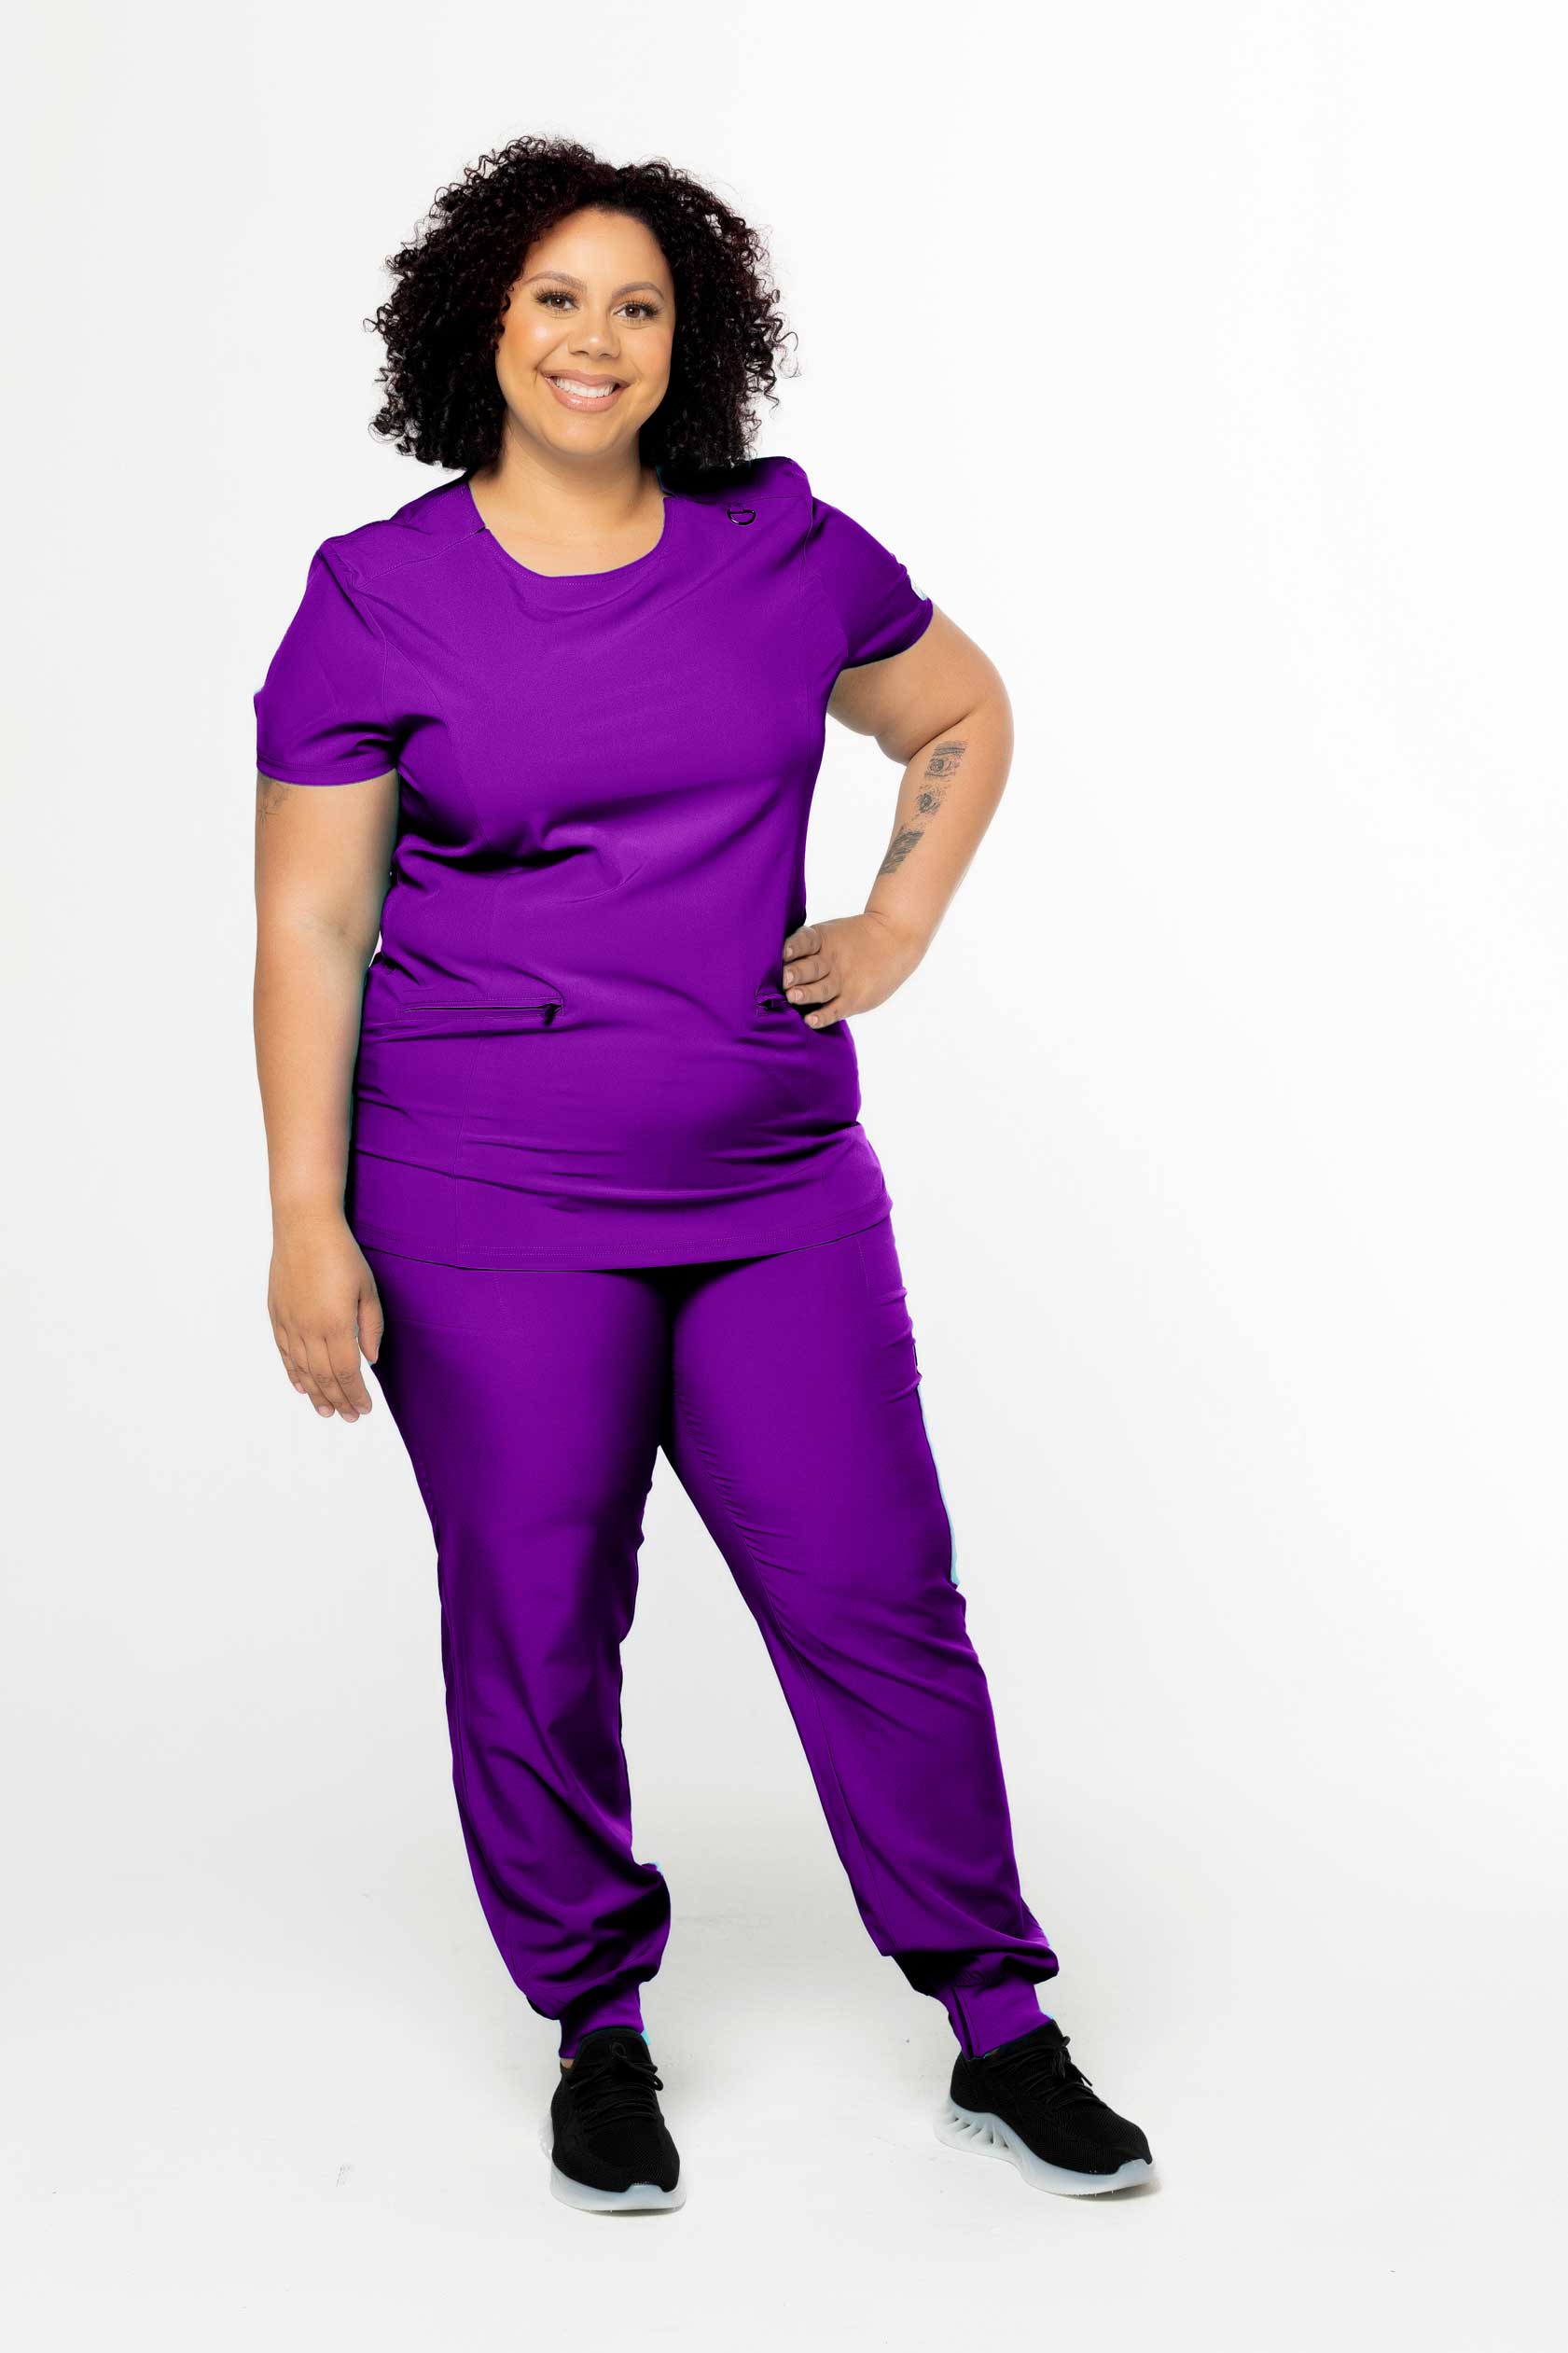 PURCHASE A SAMPLE SET (MATCHING TOP AND BOTTOM) - THE CSCRUBS COMFORT COLLECTION